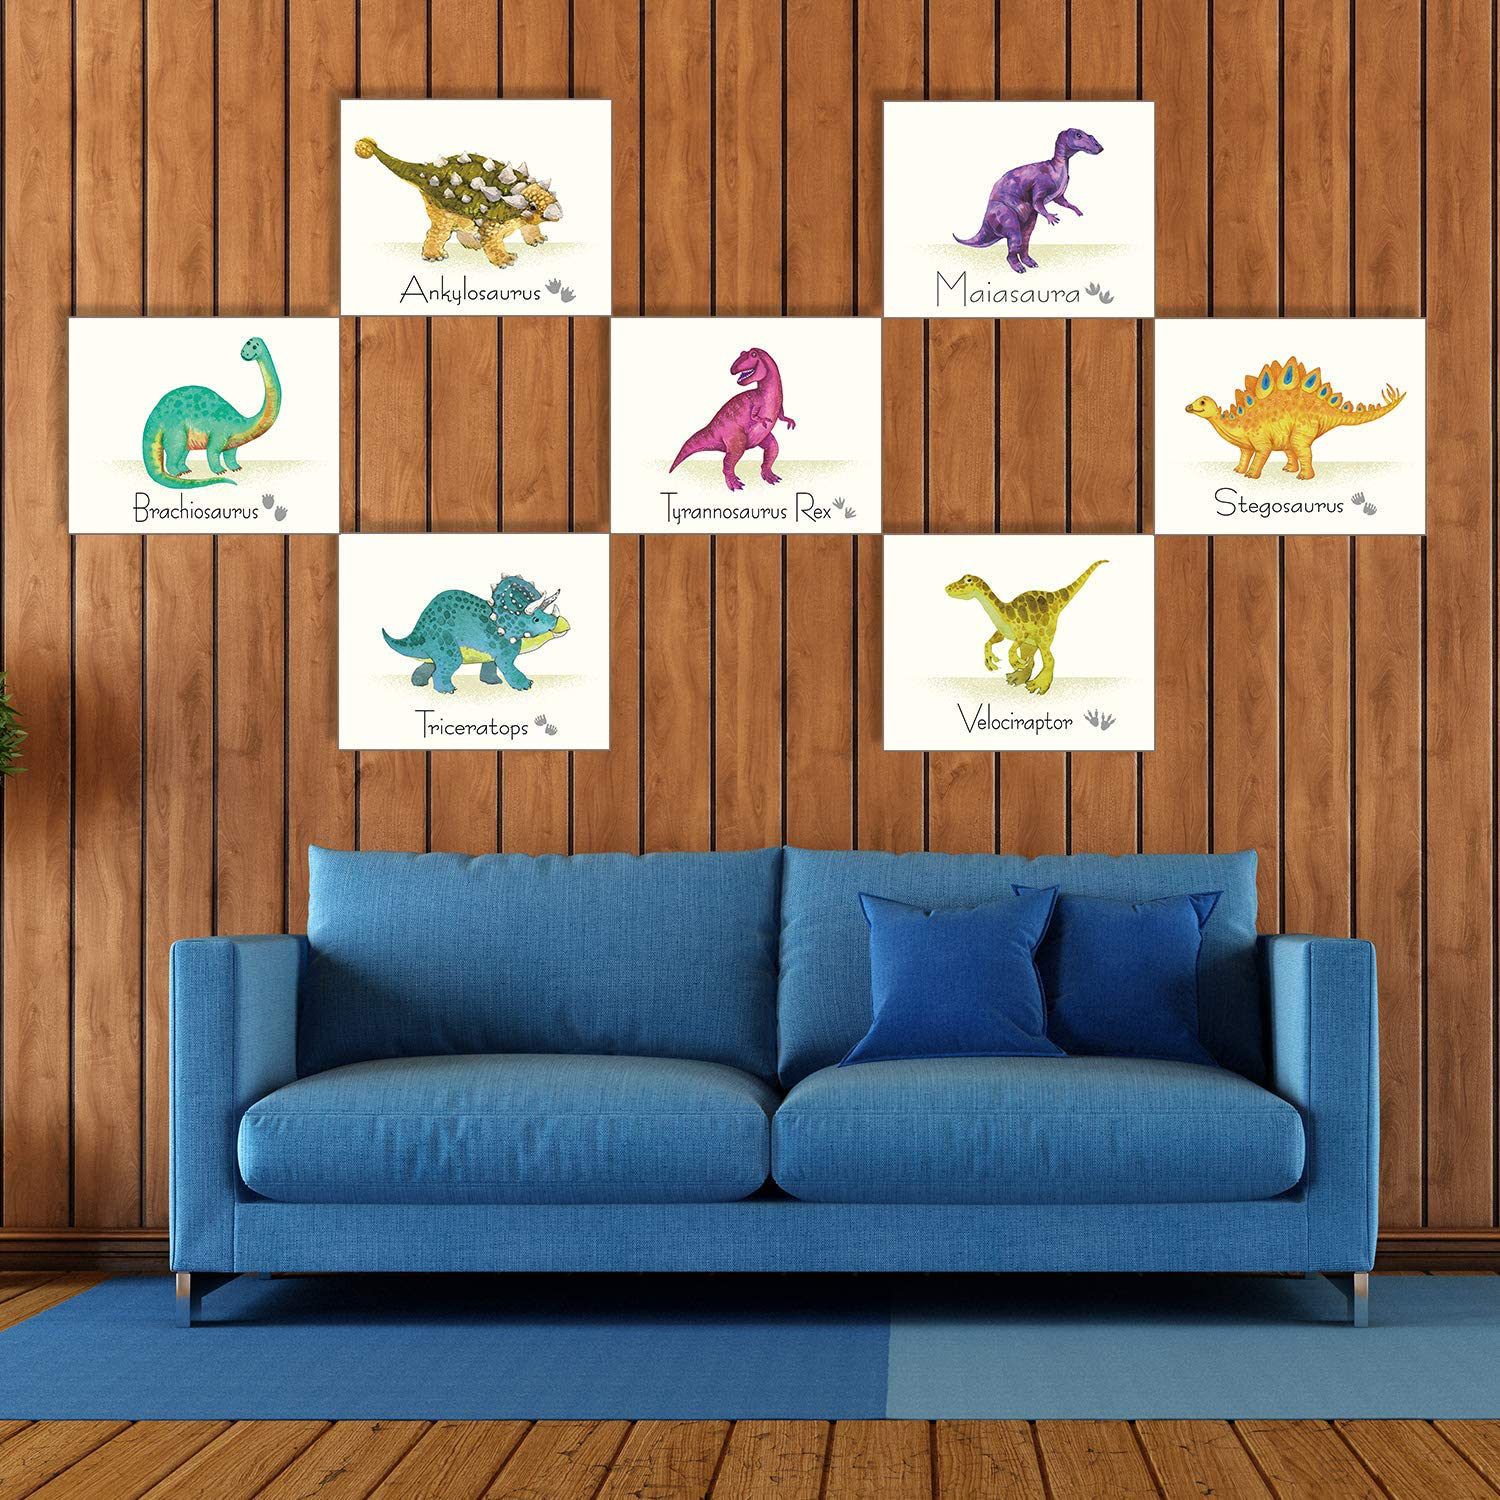 Outus 9 Pieces Dinosaur Wall Art Prints Dinosaurs Poster Wall Decals with Unframed Pictures Dinosaur Birthday Gift for Nursery and Kids Room Decorations